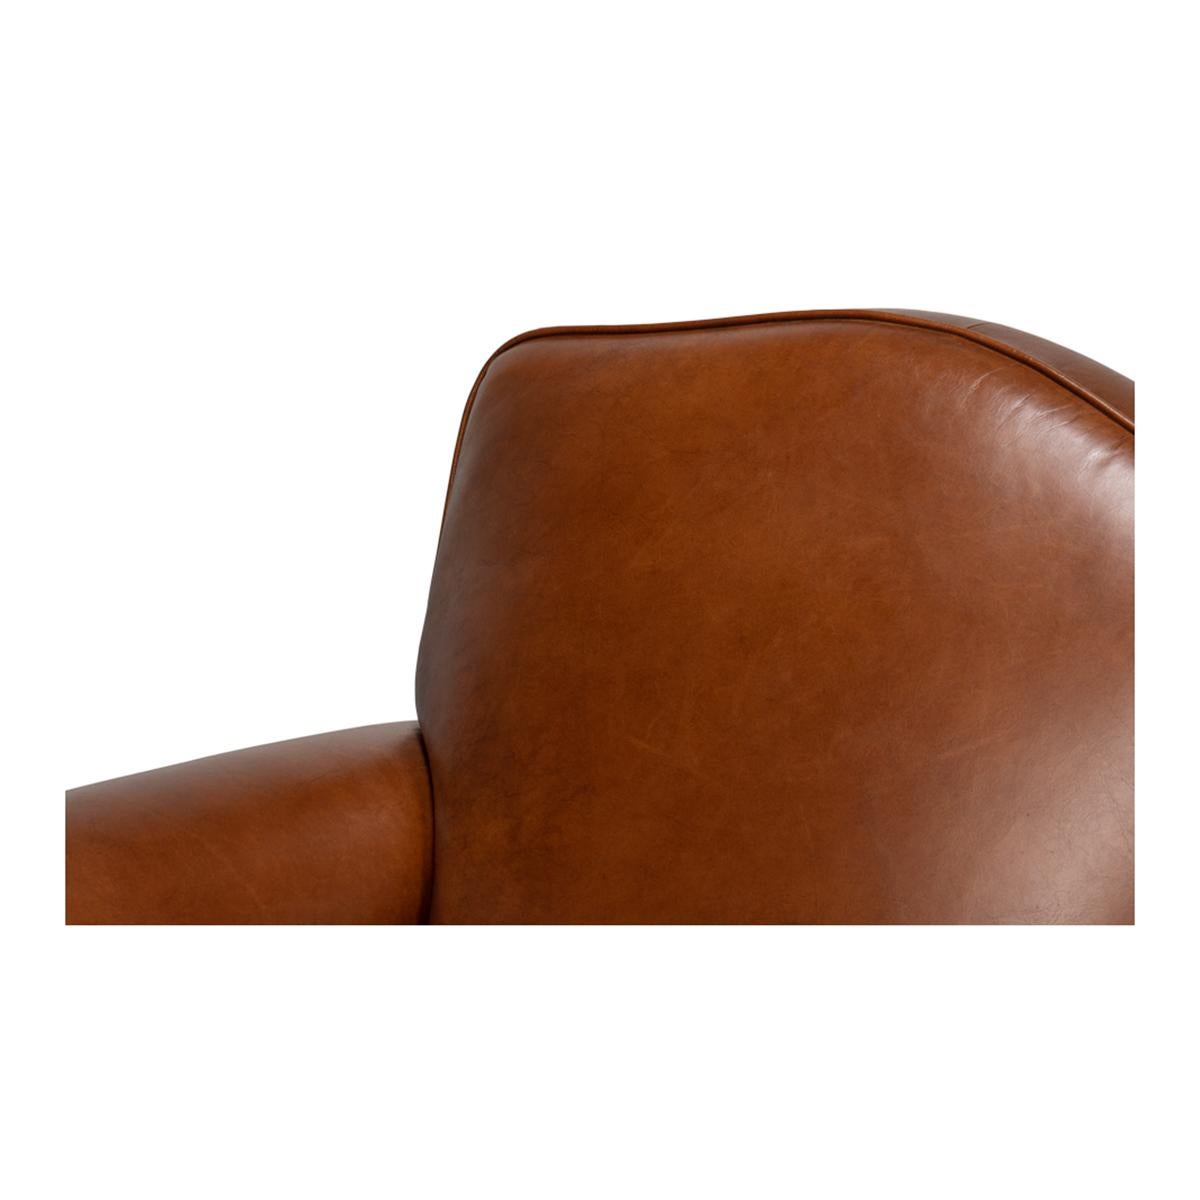 French Art Deco Style Leather Club Chair For Sale 2